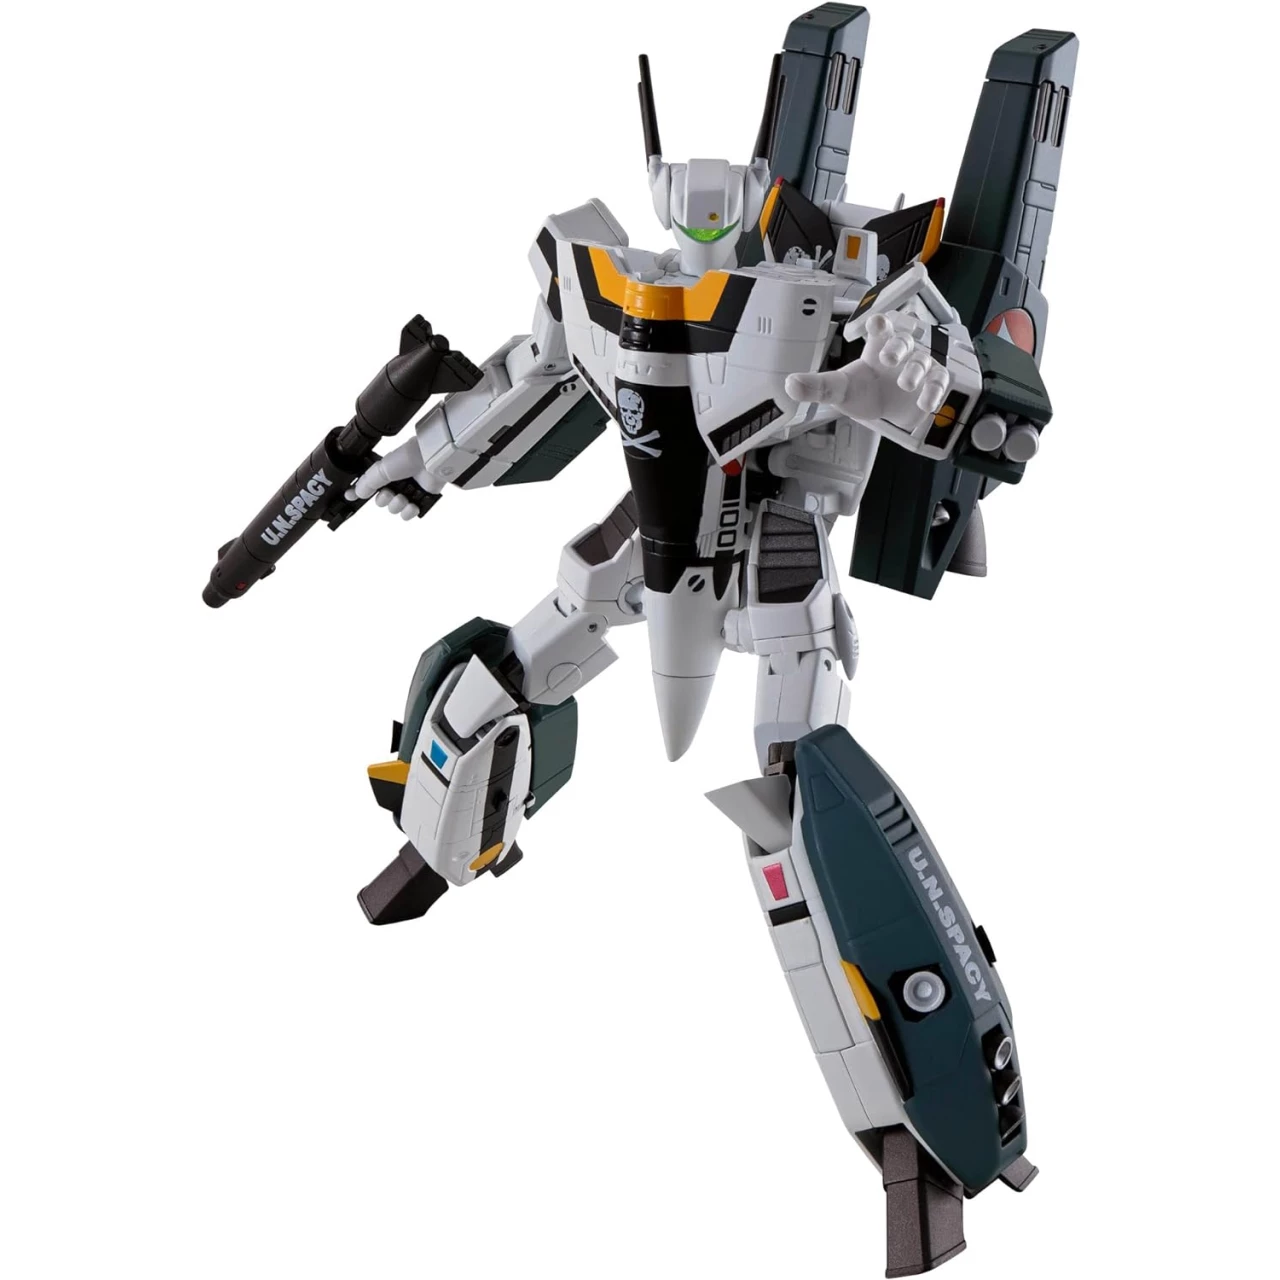 BANDAI SPIRITS(バンダイ スピリッツ) HI-Metal R Super Time Fortress Macross VF-1S Super Valkyrie (Kireki Ichijo), Approx. 5.5 inches (140 mm), Die-Cast &amp; ABS &amp; PVC Pre-Painted Action Figure